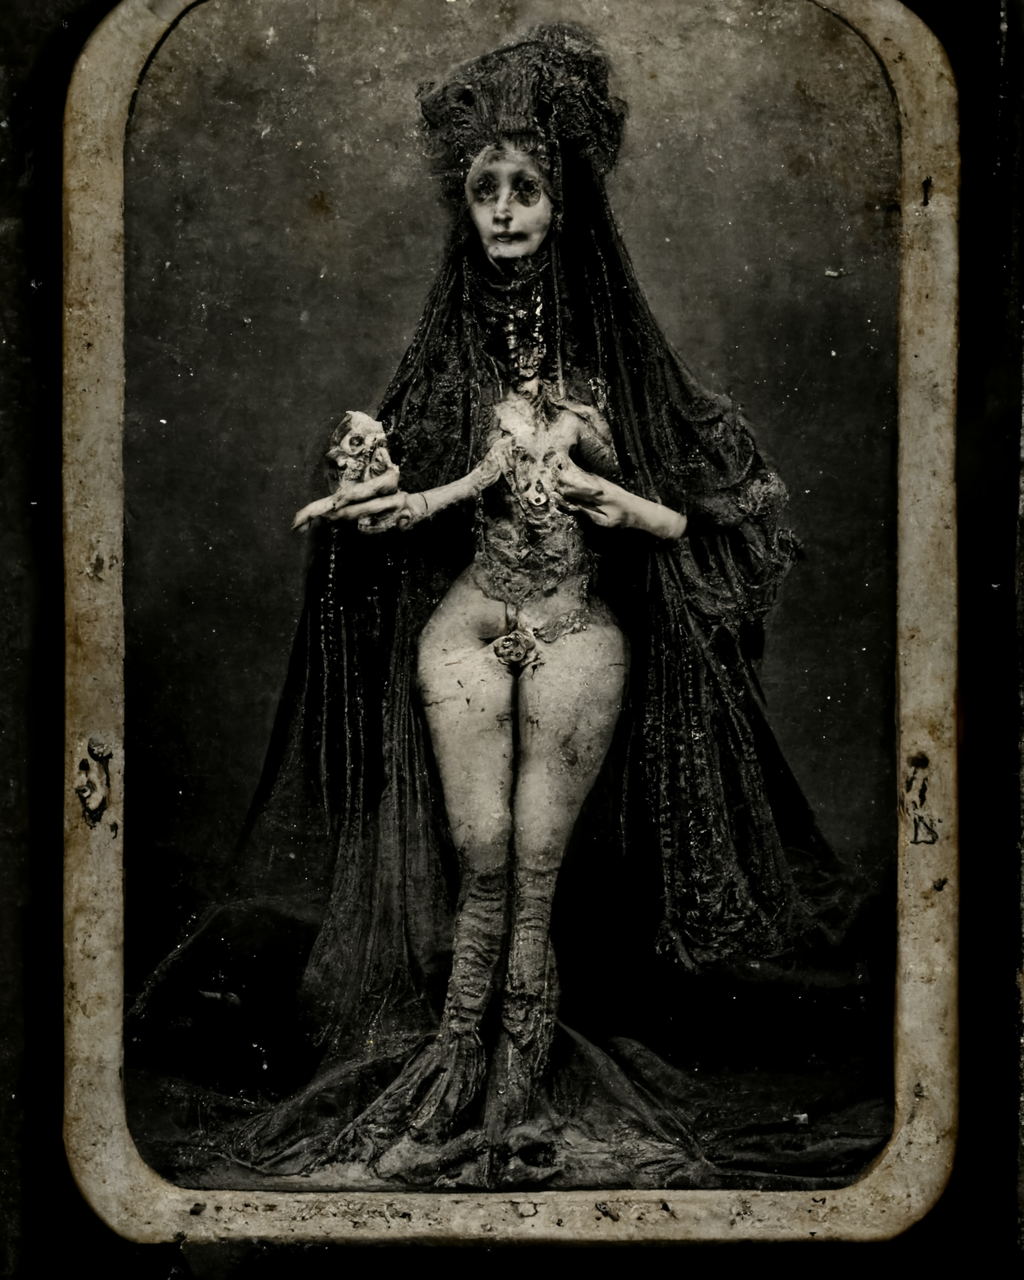 cc1fba12-422d-4bb1-af8d-f2526338e353_Roberto_Seg_httpss.mj.runzJQnSc__Victorian_freak_show_female_photographs_very_creepy_ghostly_spirits_of_the_dead.png